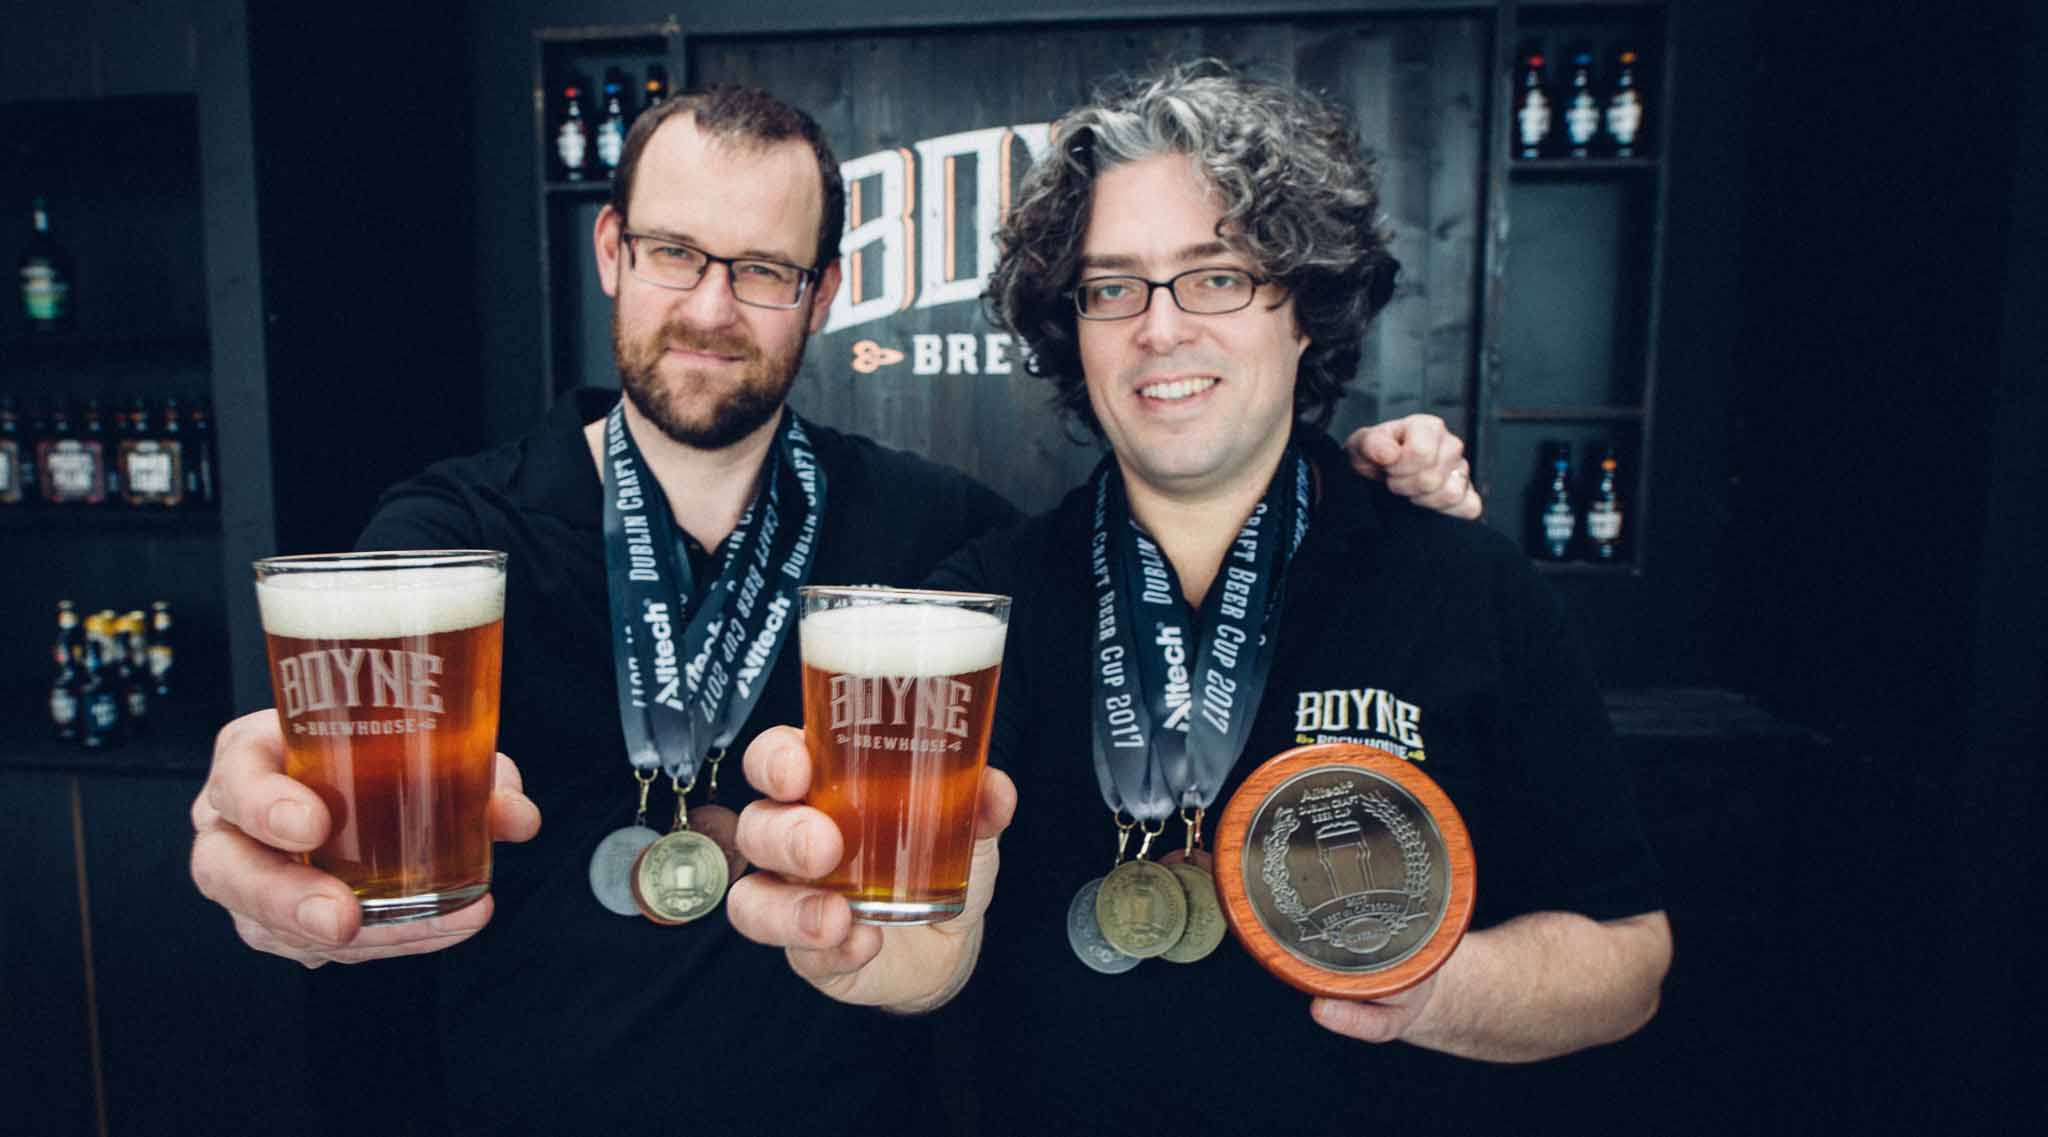 Brewhouse Head Brewer Andrew Jorgensen and Richard Hamilton with the Alltech Dublin Craft Beer Cup awards.